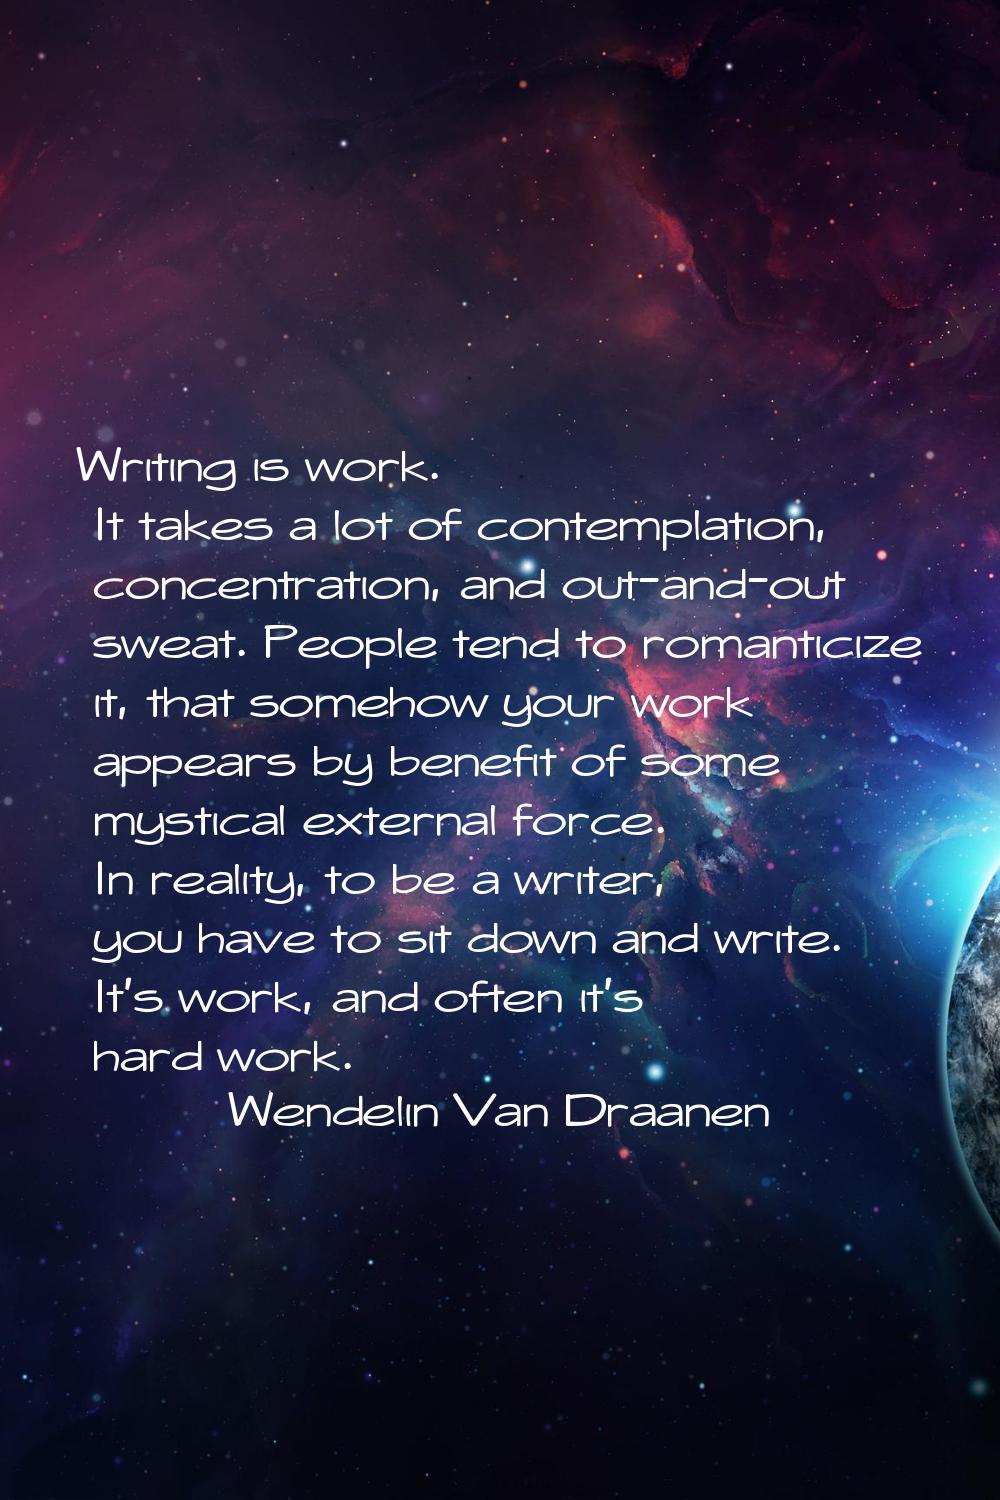 Writing is work. It takes a lot of contemplation, concentration, and out-and-out sweat. People tend